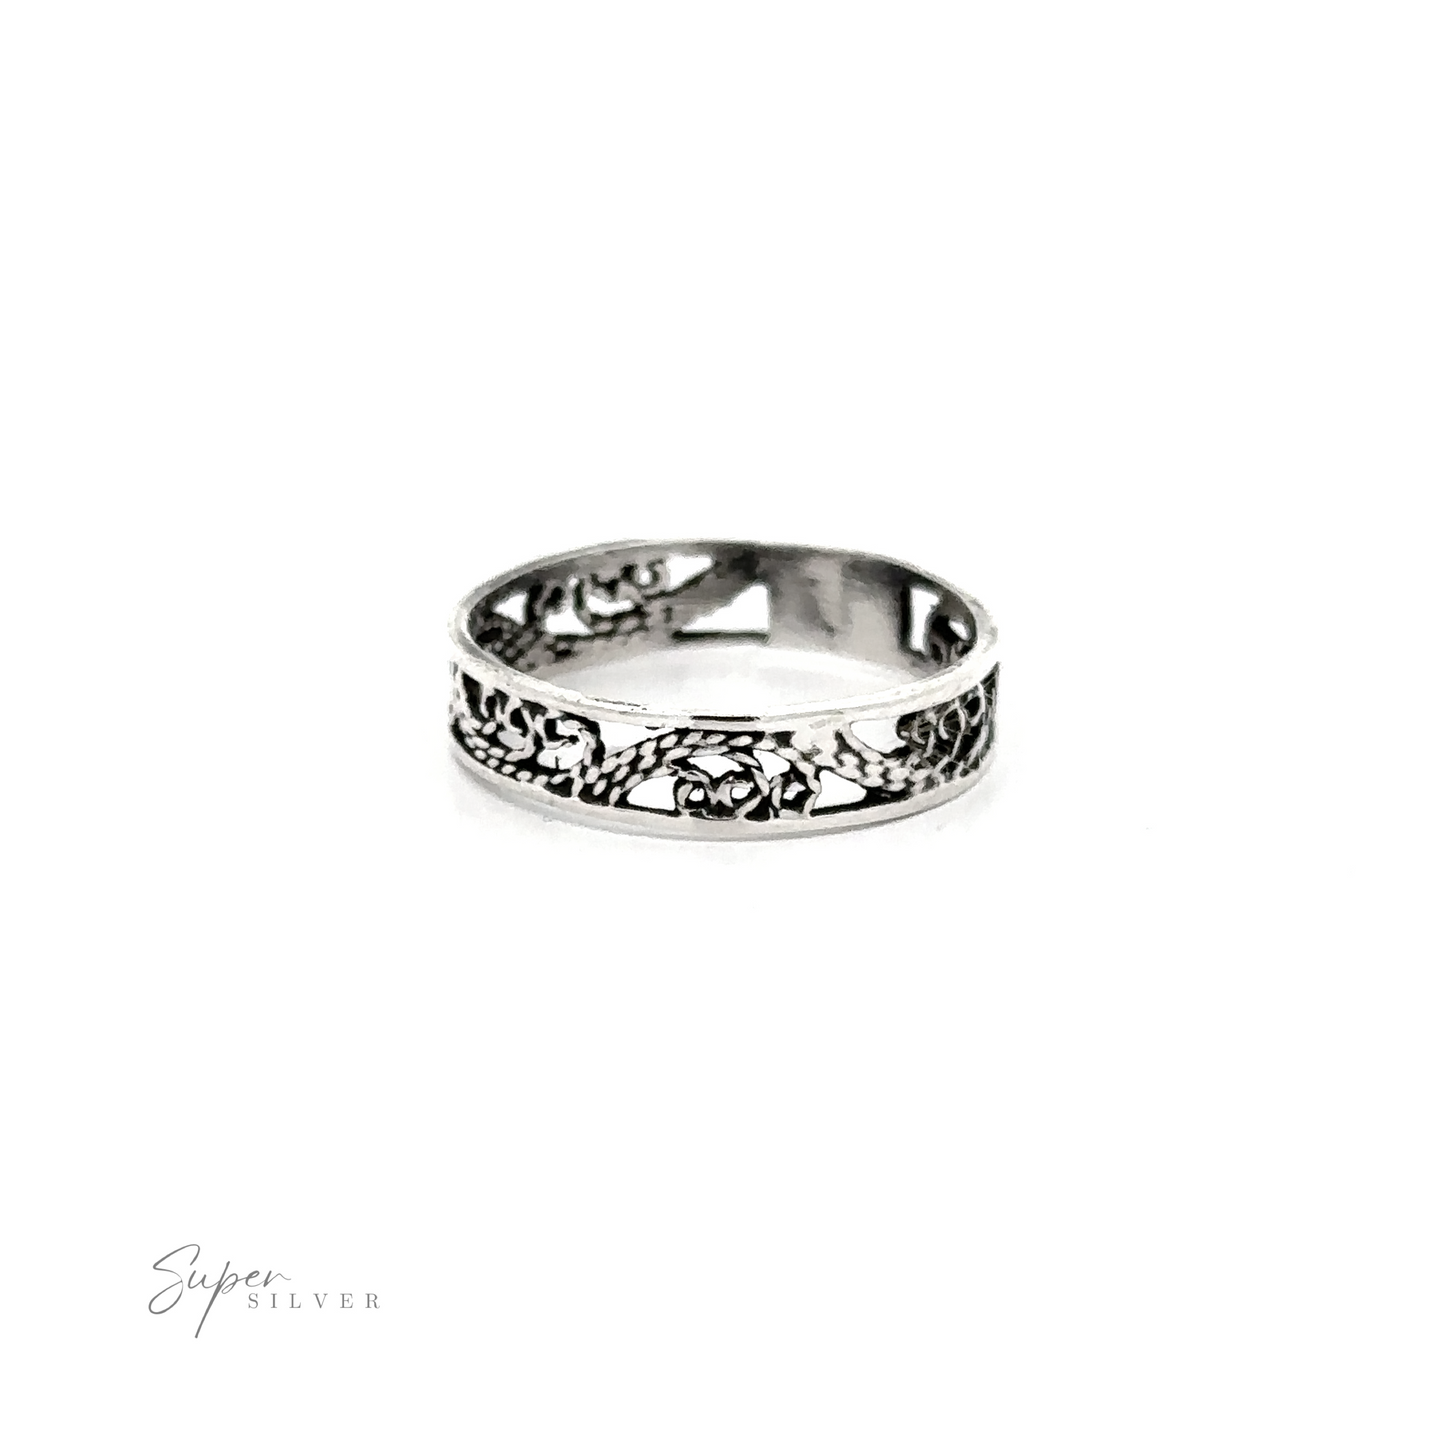 A Freestyle Filigree Band with etched floral designs on a silver band.